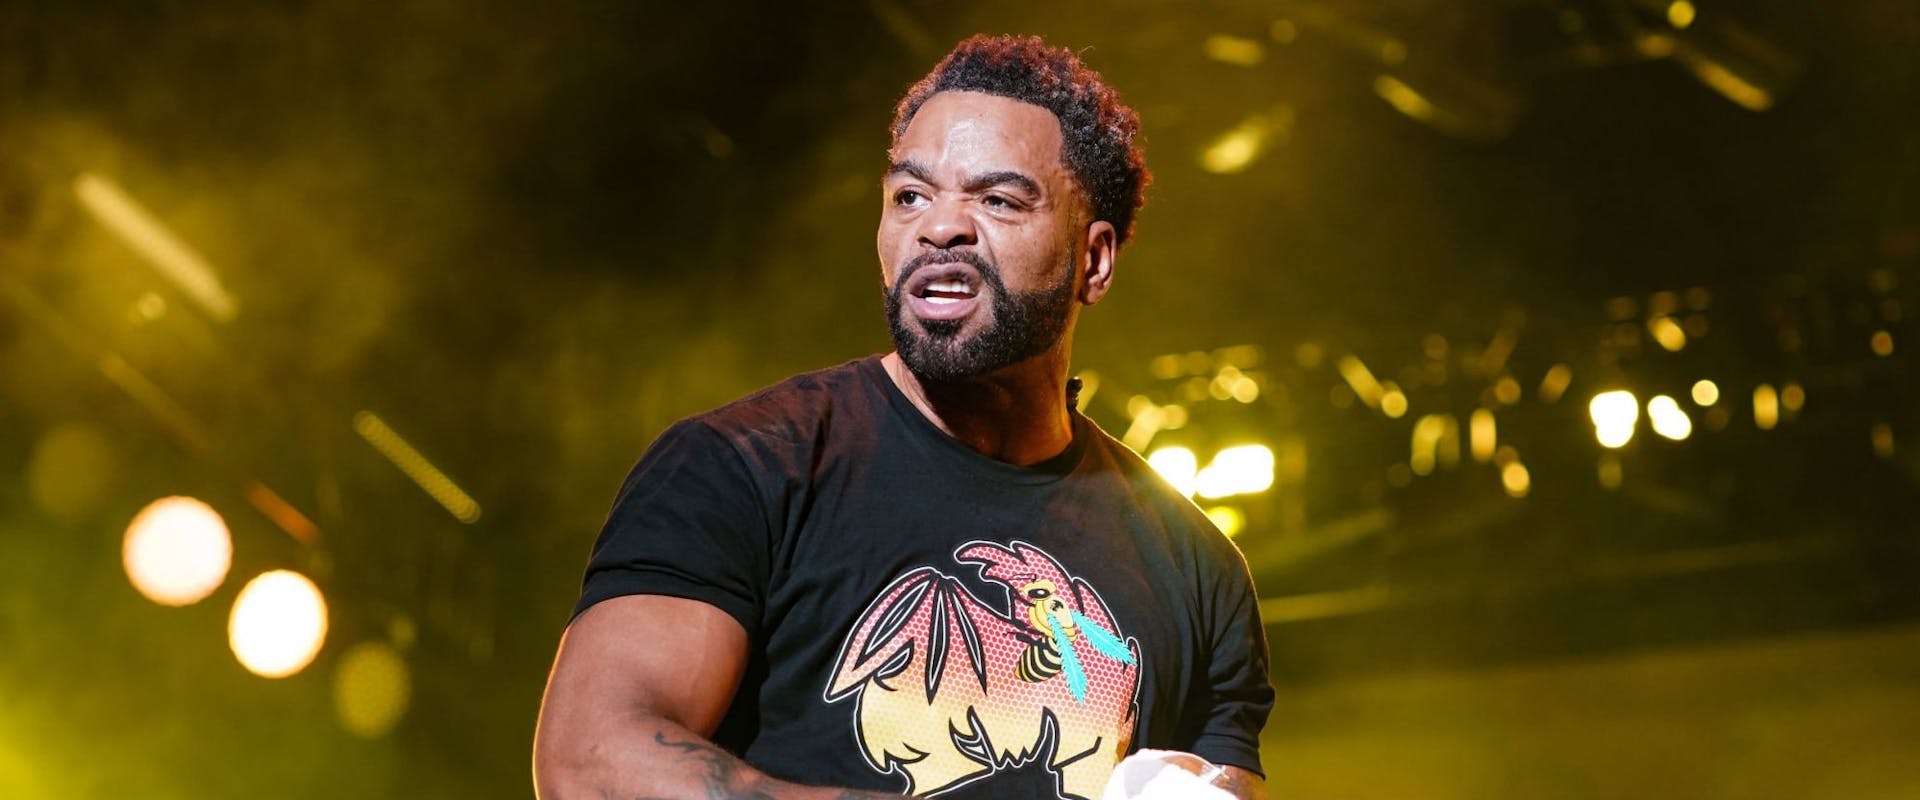 Method Man of Wu-Tang Clan performs with The Roots during the 2022 Essence Festival of Culture at the Louisiana Superdome on July 03, 2022 in New Orleans, Louisiana. (Photo by Erika Goldring/Getty Images)